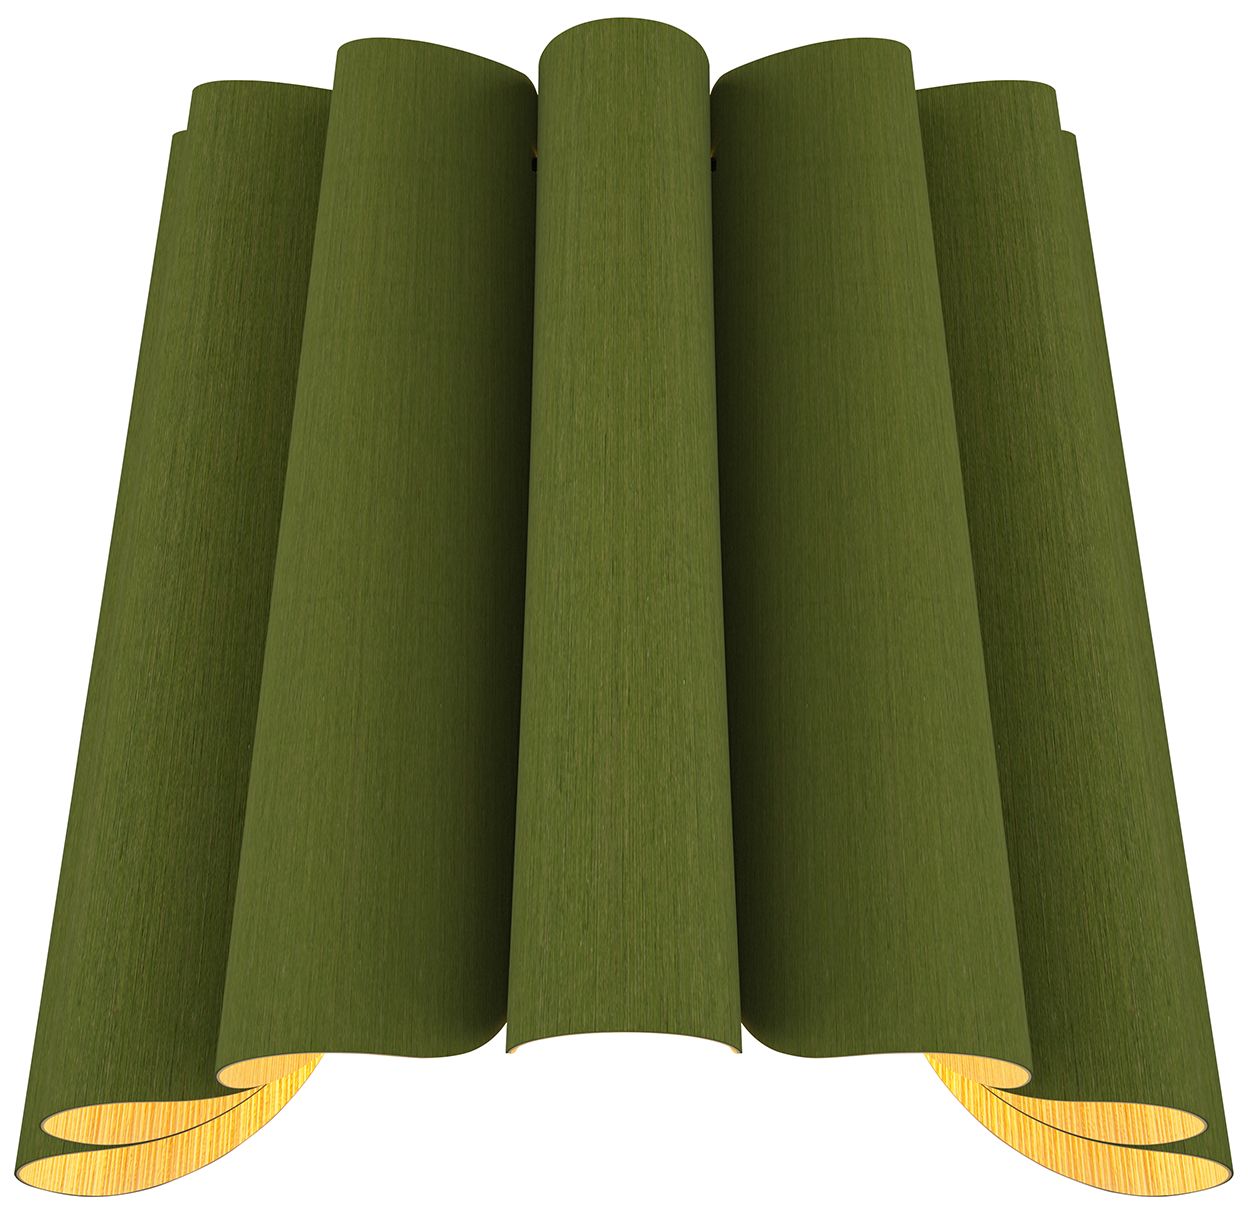 Renata 11.75" High Green WEP Light Collection Wall Sconce